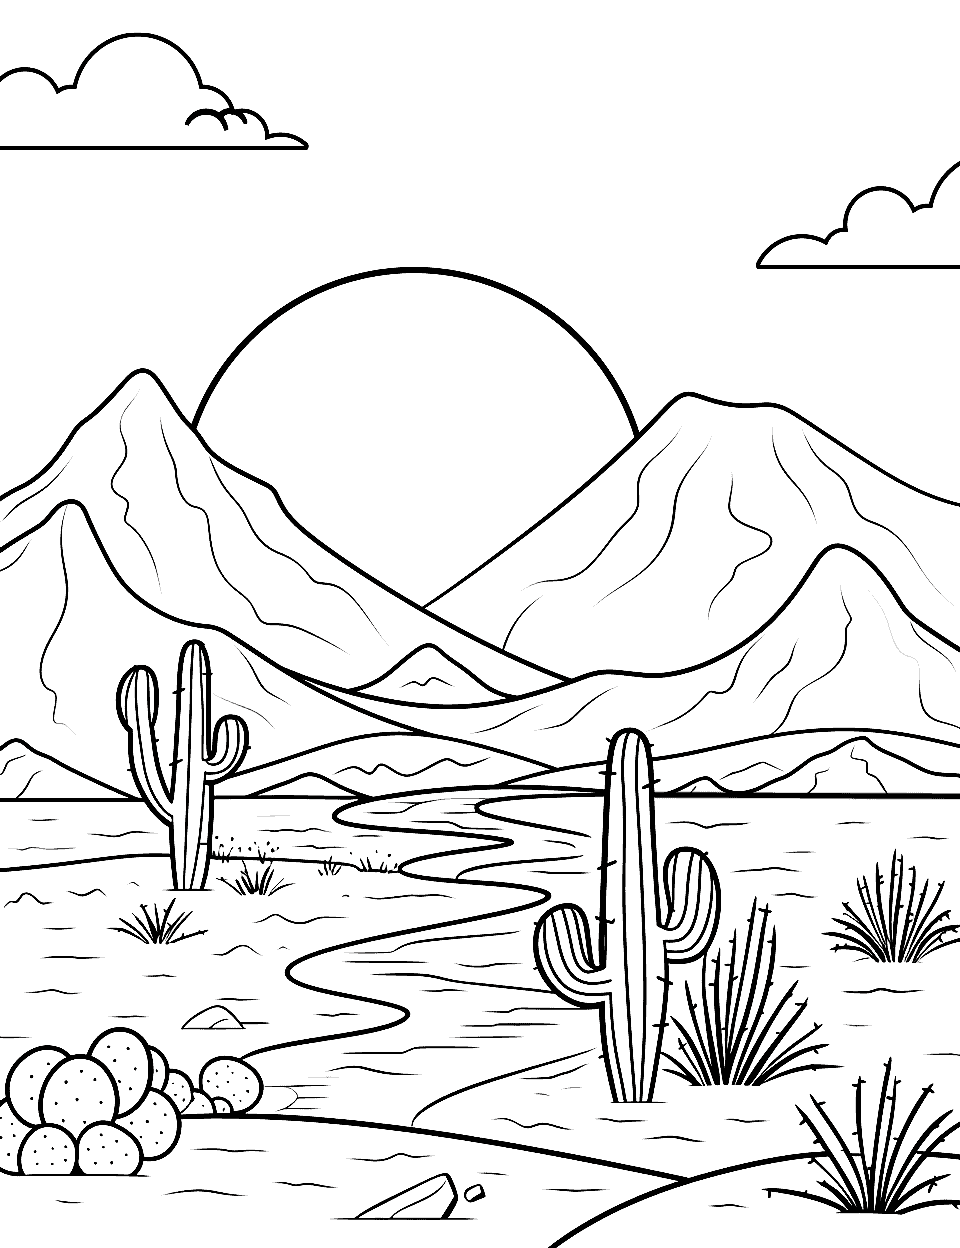 Desert Landscape at Sunset Nature Coloring Page - A desert scene with cacti and mountains, under a sunset sky.